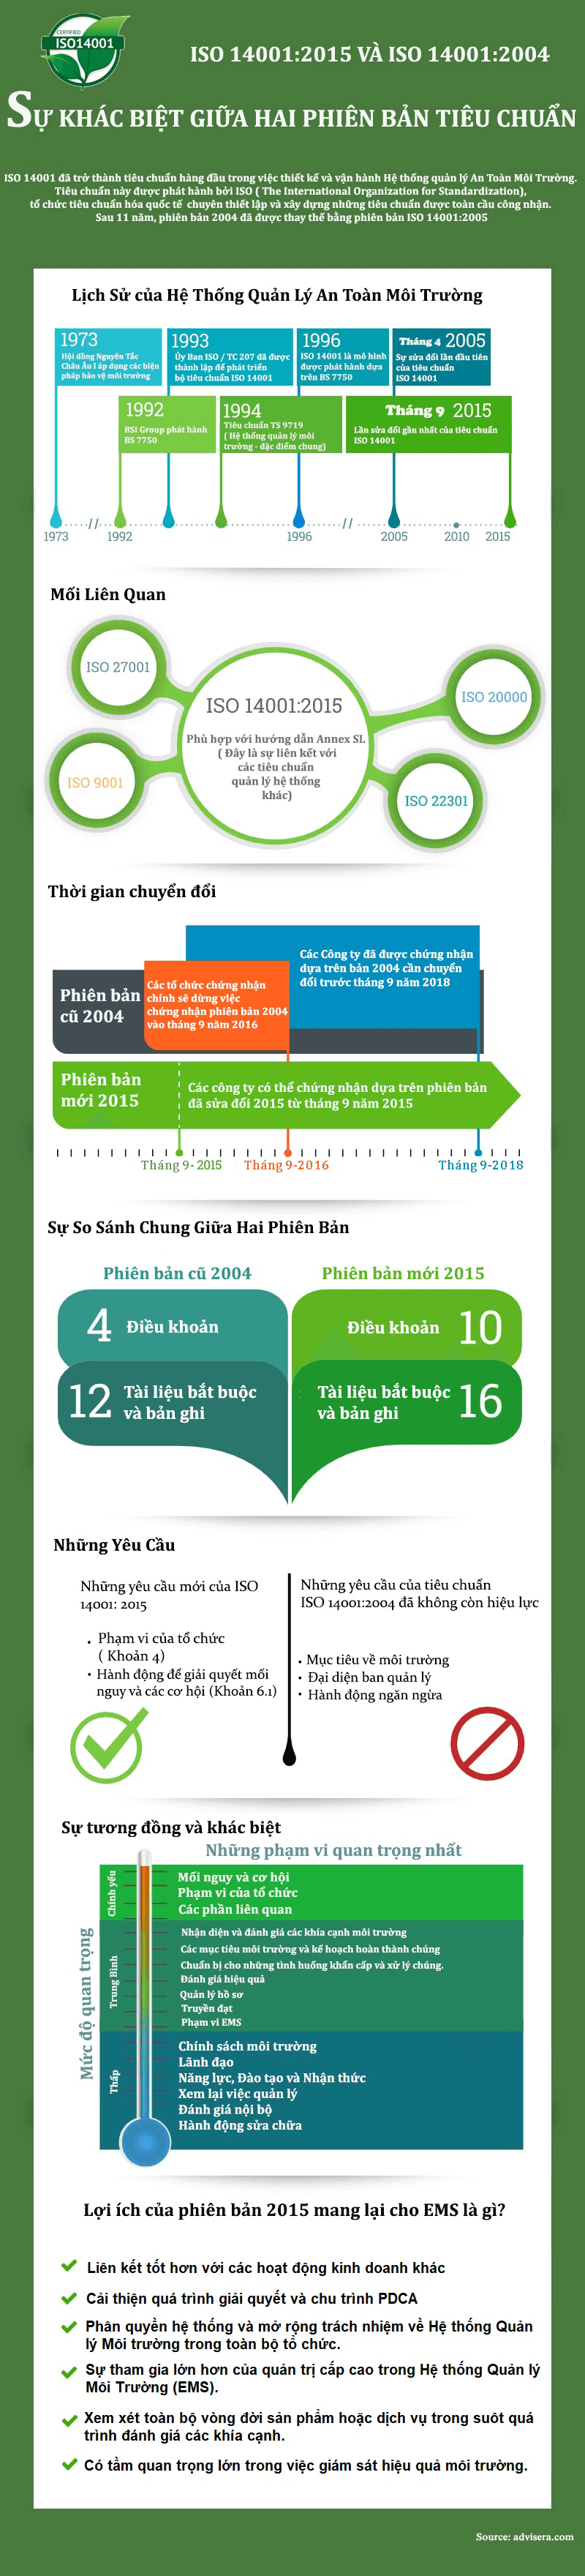 iso-14001-2015-vs-2004-infographic034a1-1